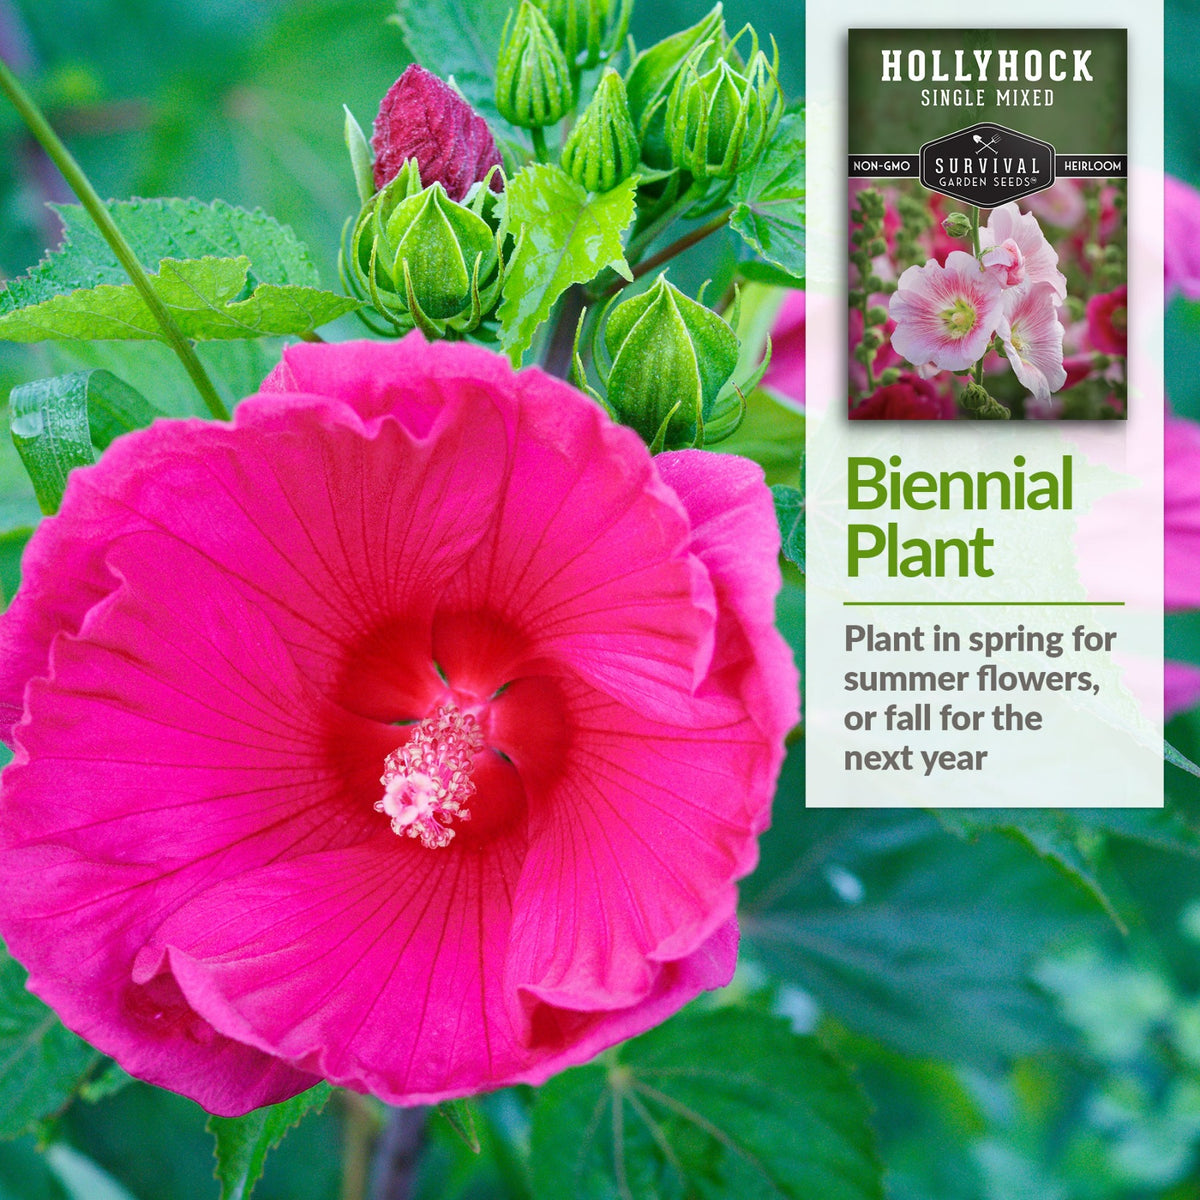 Plant Hollyhocks in spring for summer flowers or fall for the next year